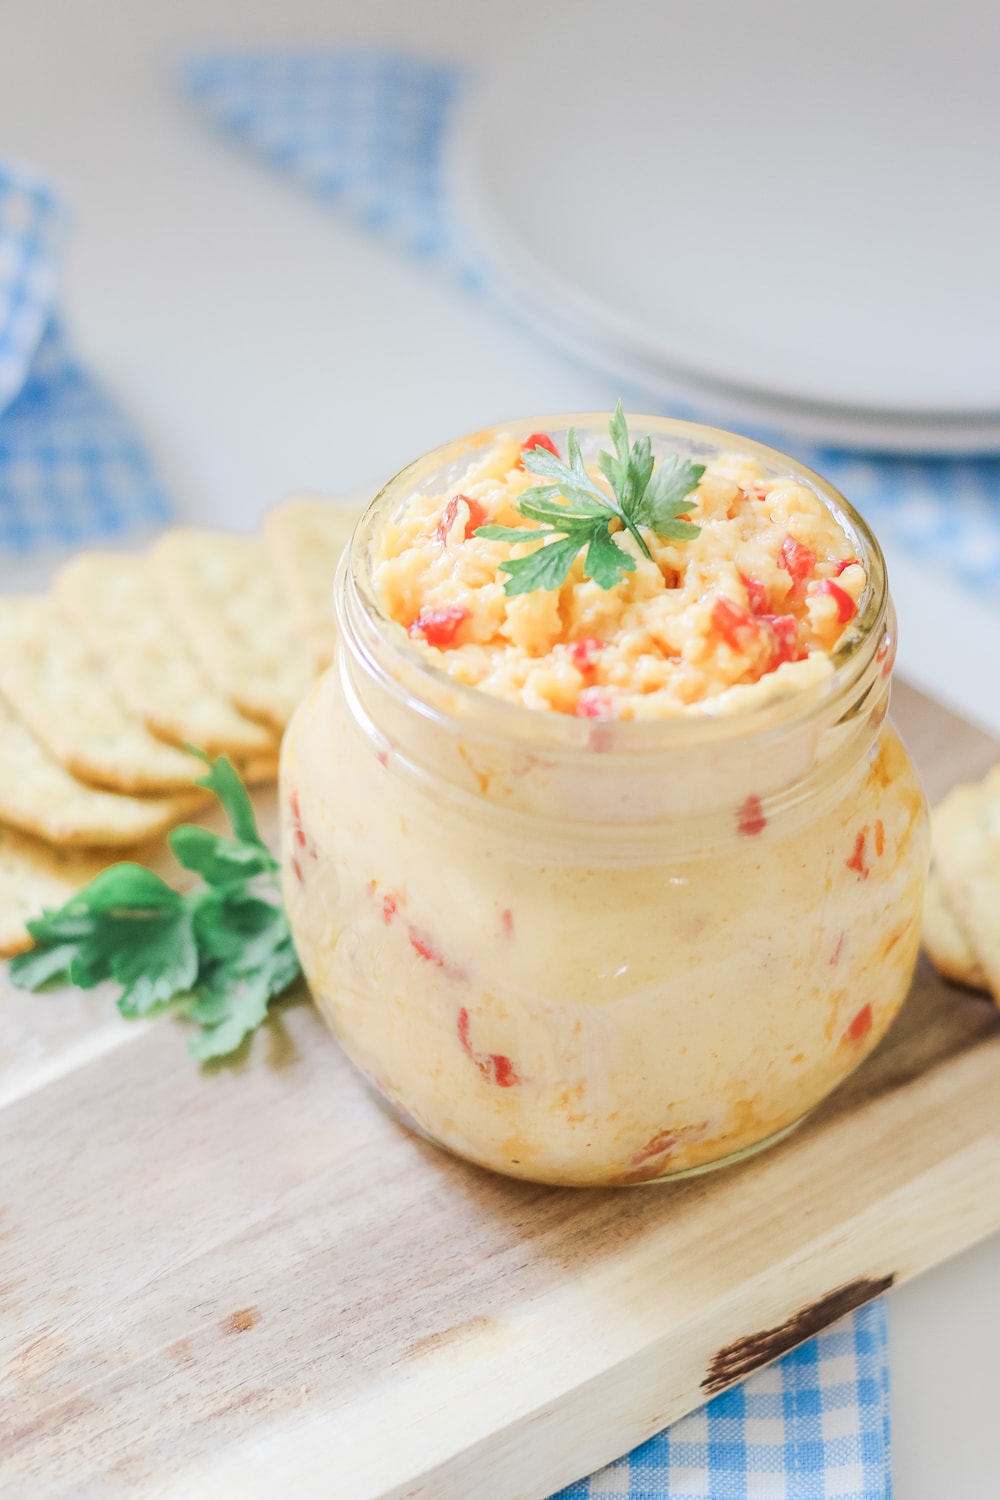 Pimento cheese dip recipe by southern lifestyle blogger Stephanie Ziajka on Diary of a Debutante